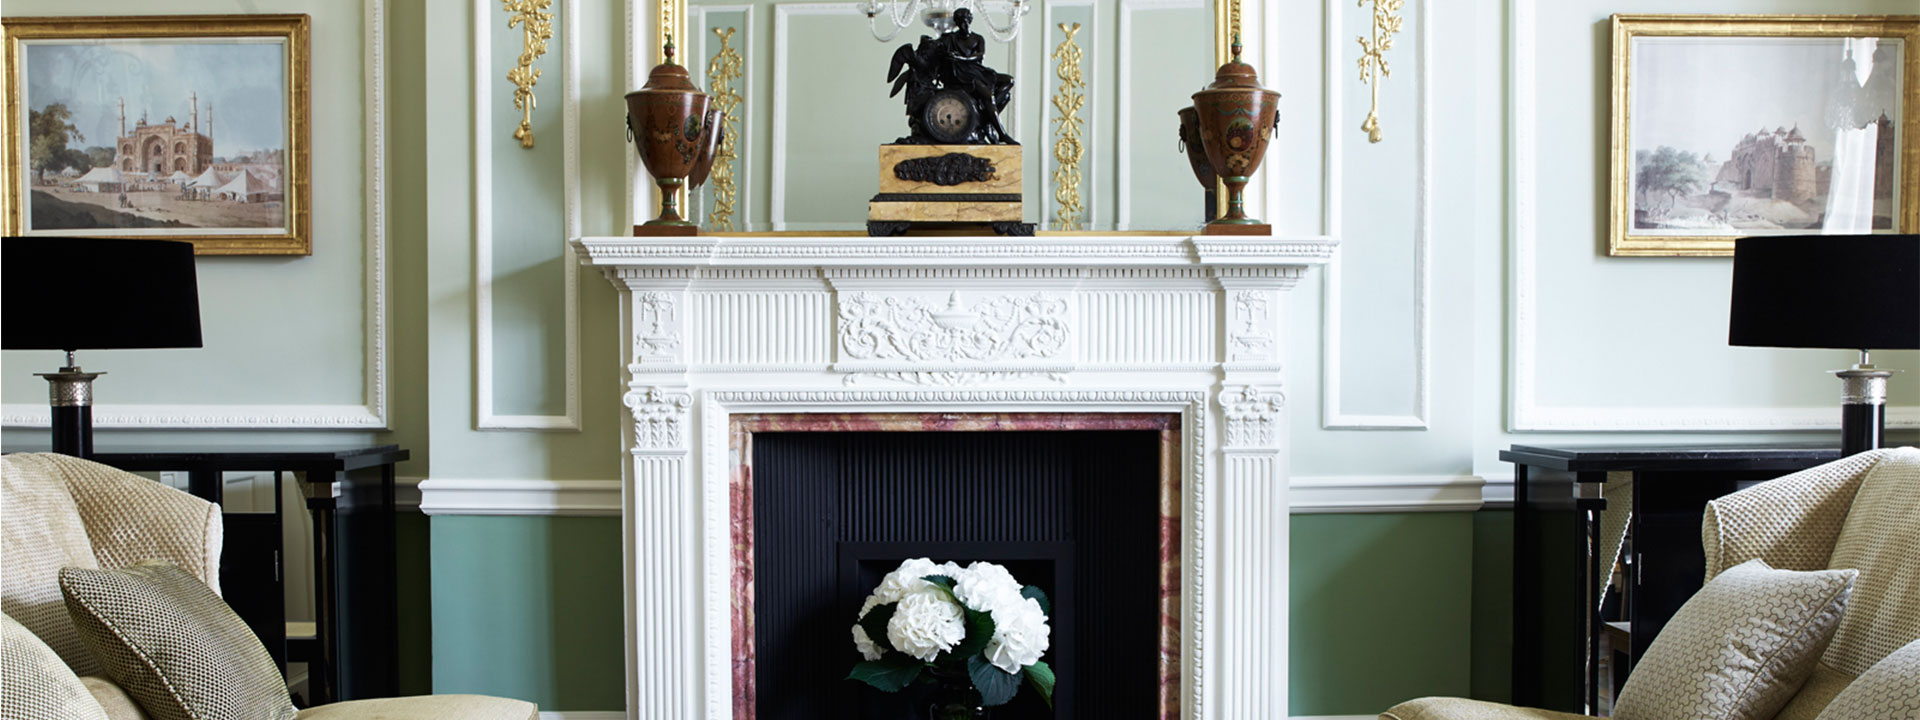 The original ornate fireplace in The Connaught suite, artwork on the wall, and luxurious interior details.